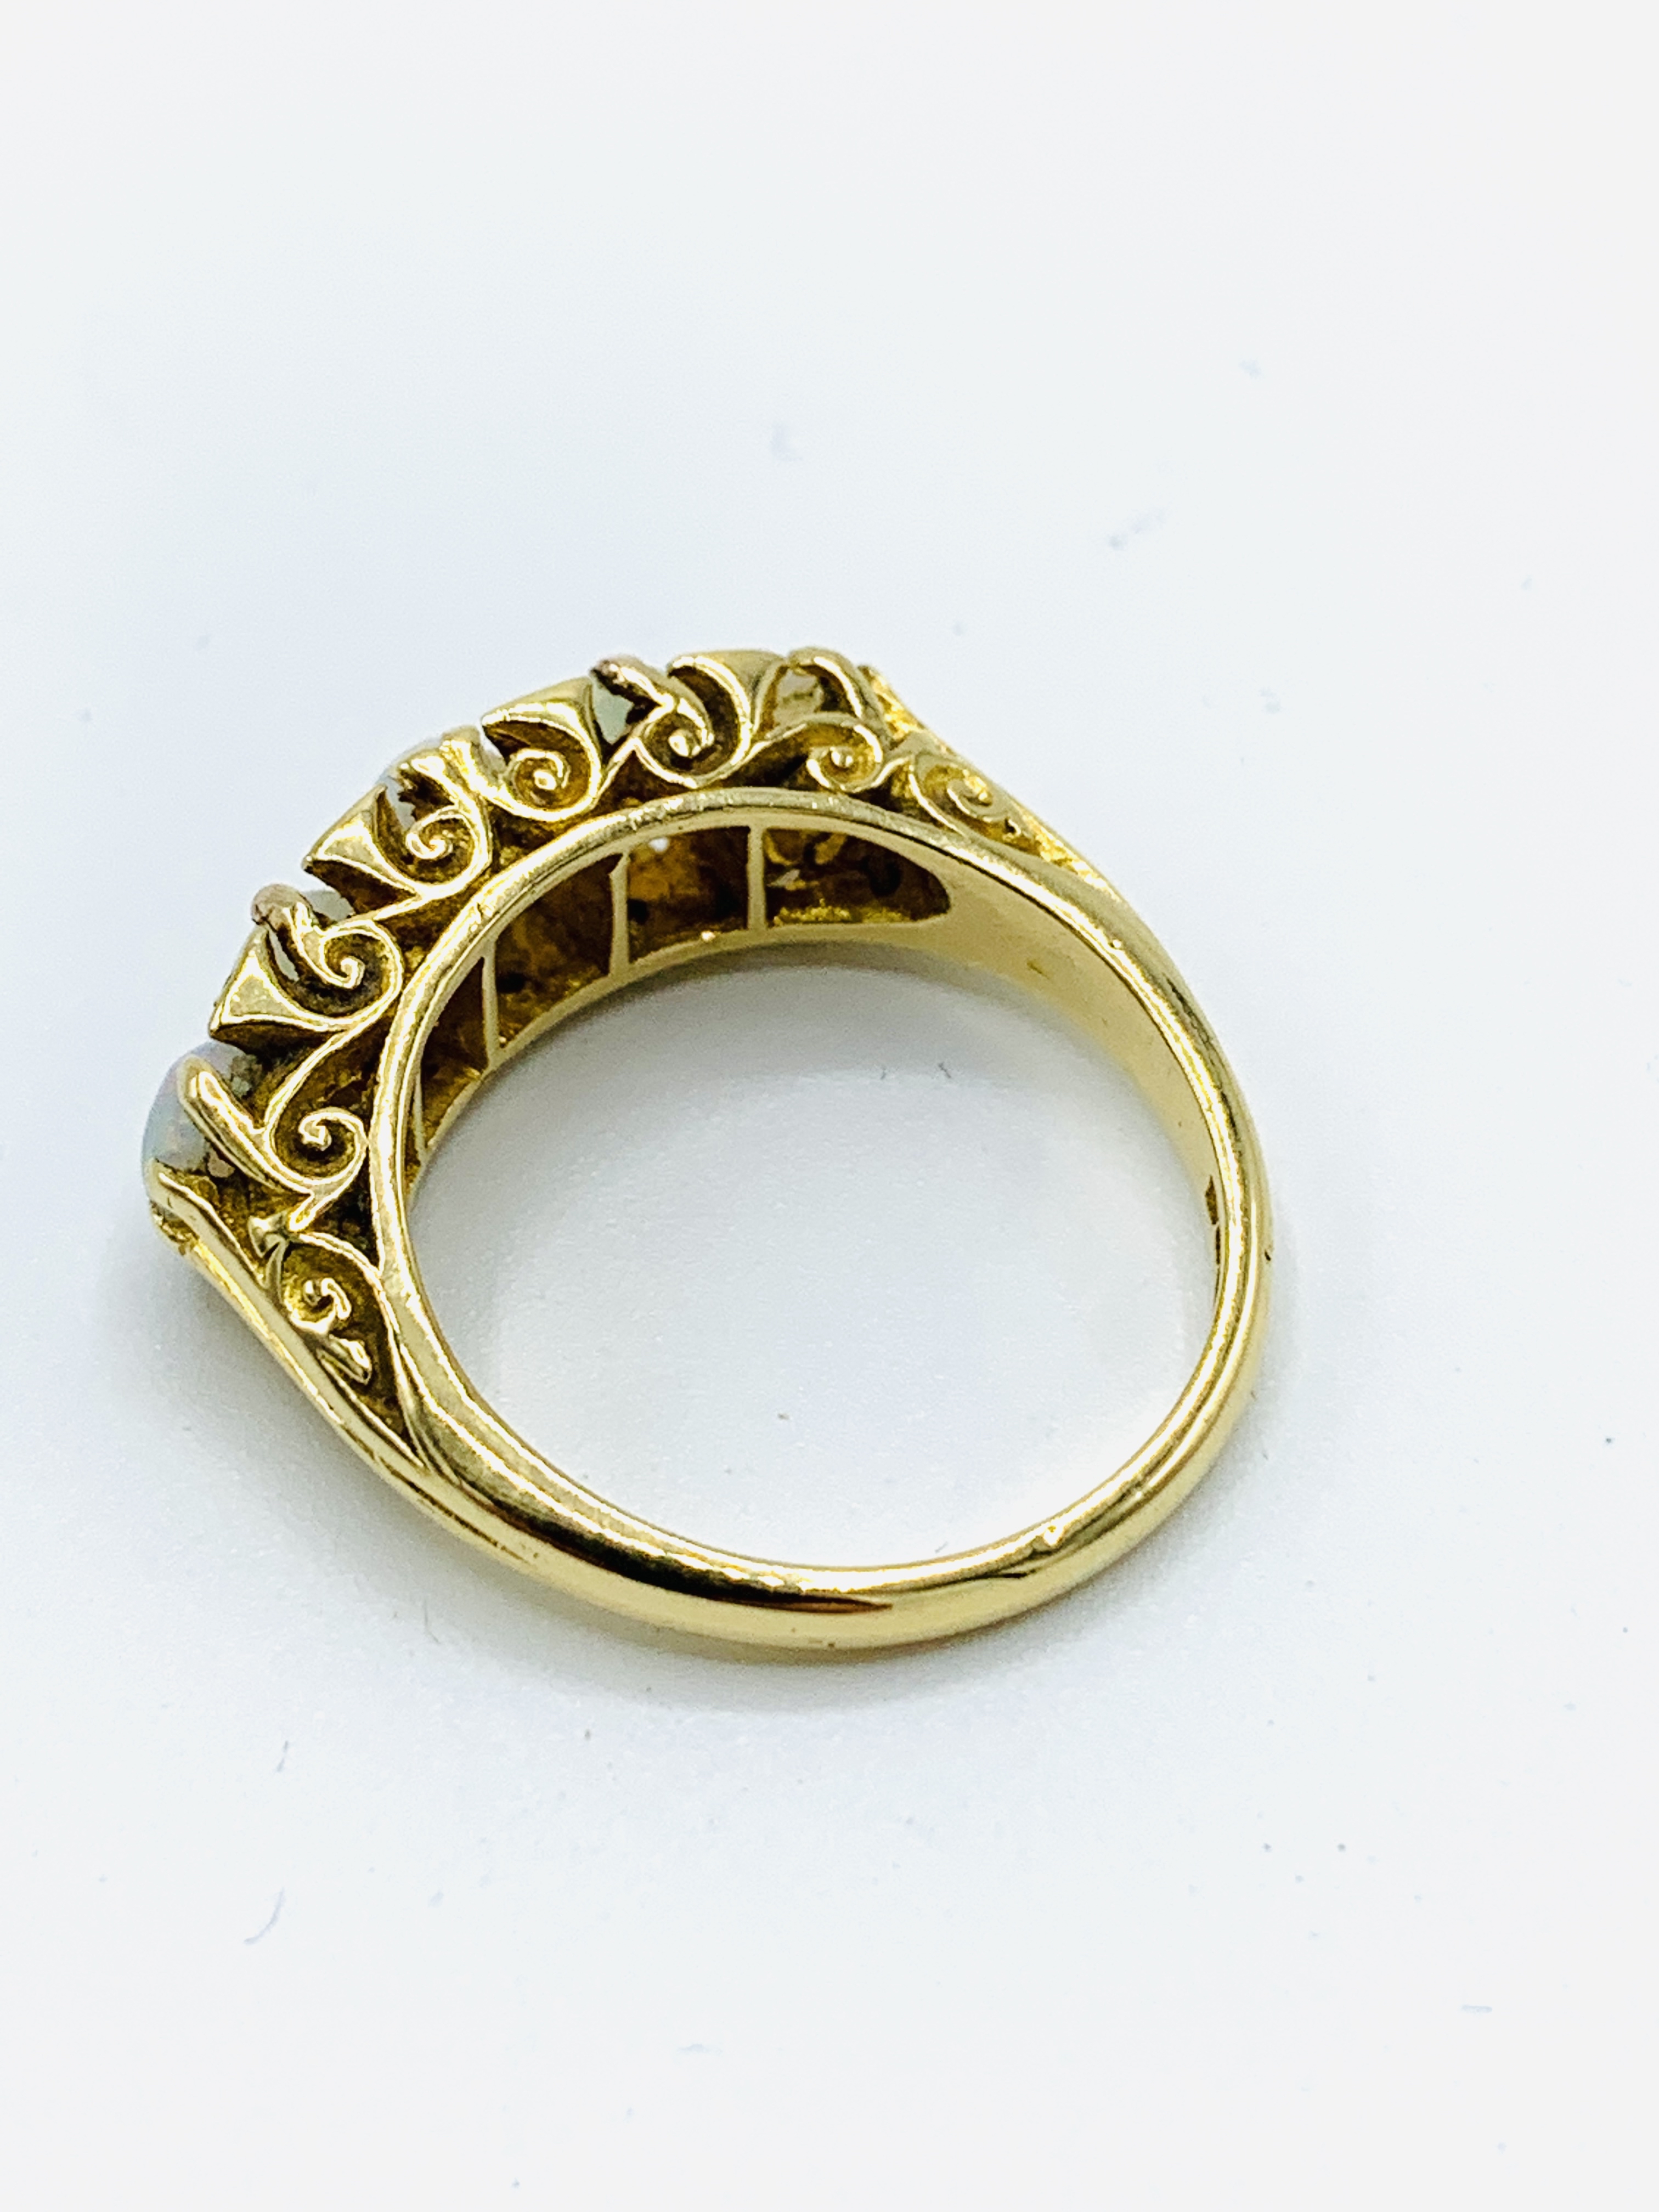 18ct yellow gold ring with five graduated opals in filigree setting - Image 4 of 4